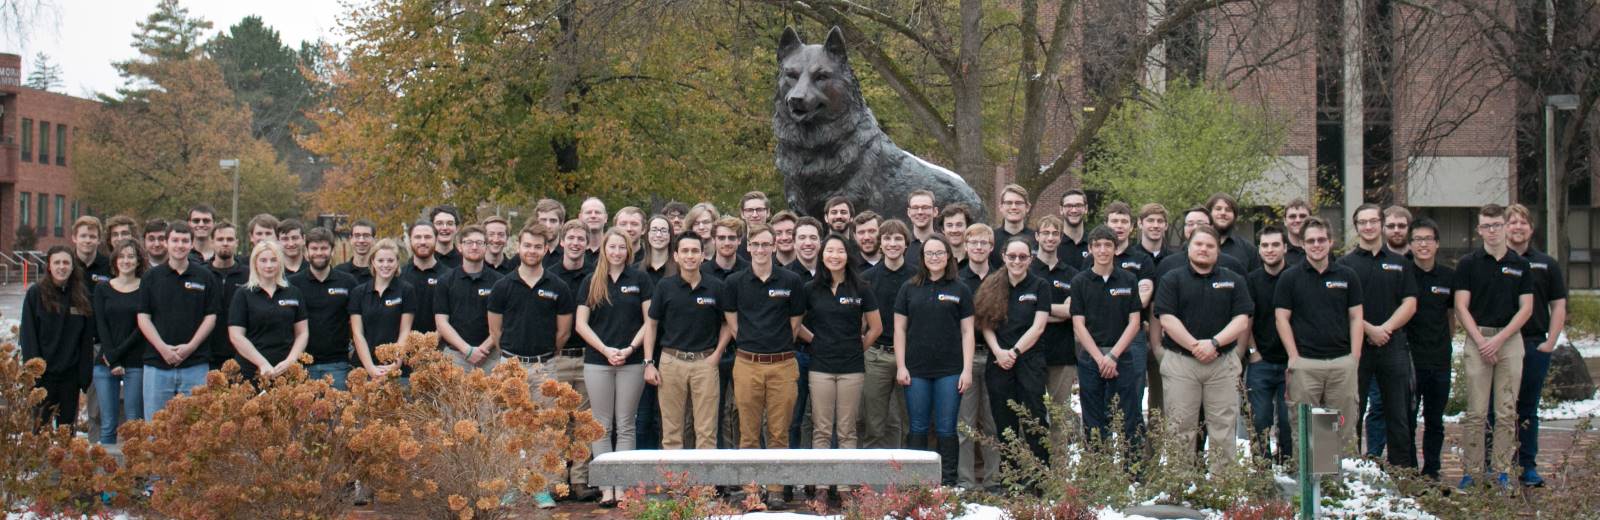 Aerospace Enterprise in front of the Husky Statue